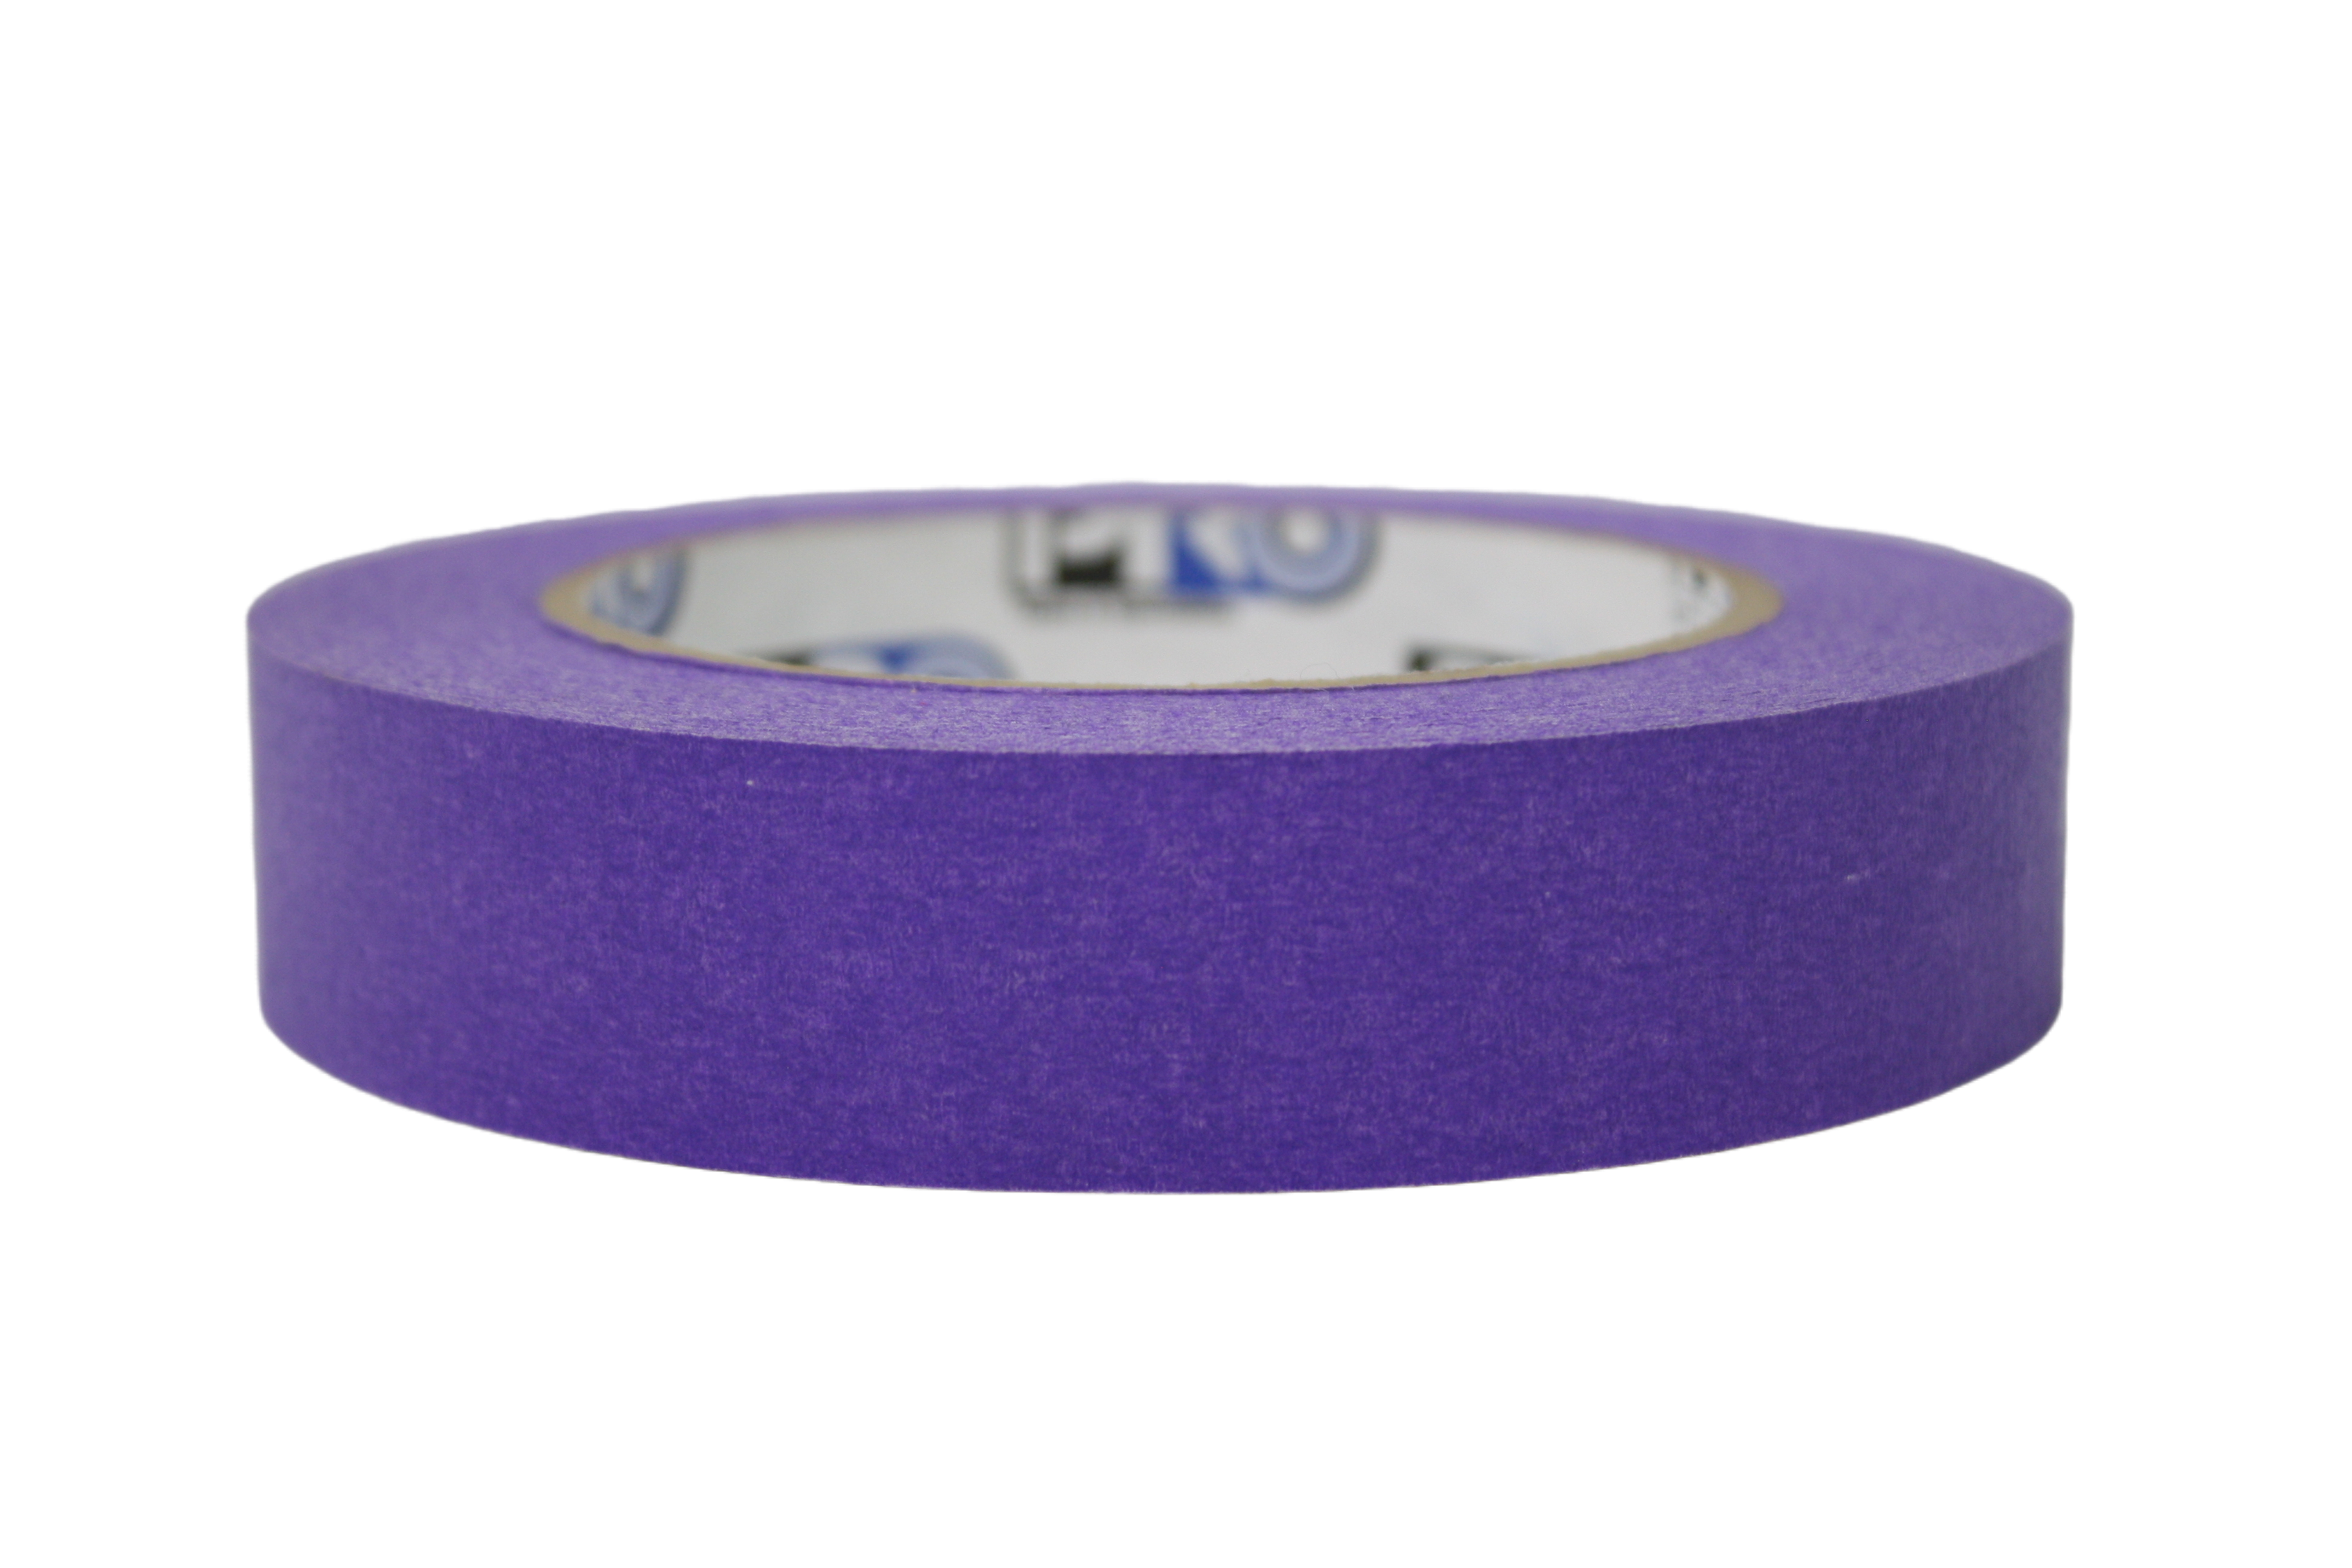 Pro 46, 1" roll, purple, front view